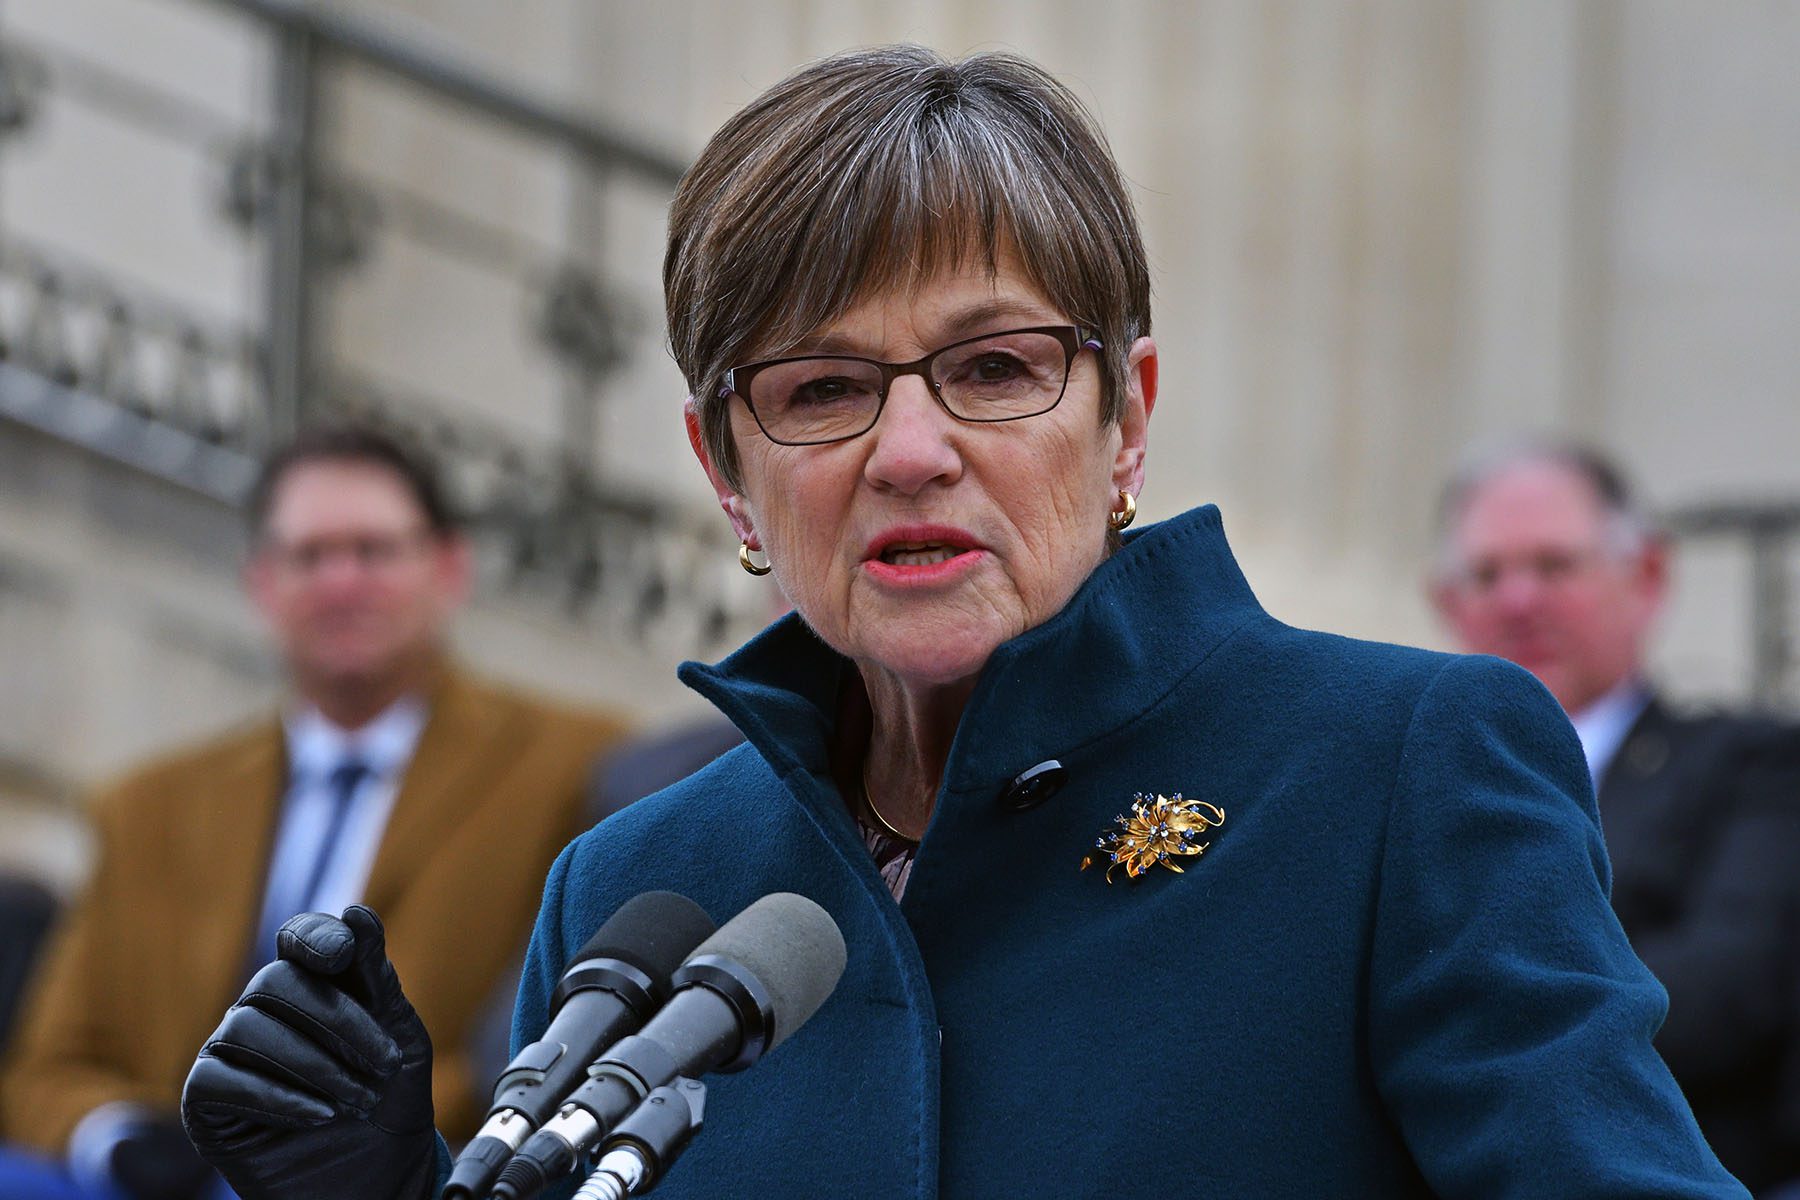 Laura Kelly delivers her inaugural speech from the front steps of the Kansas State Capitol building.